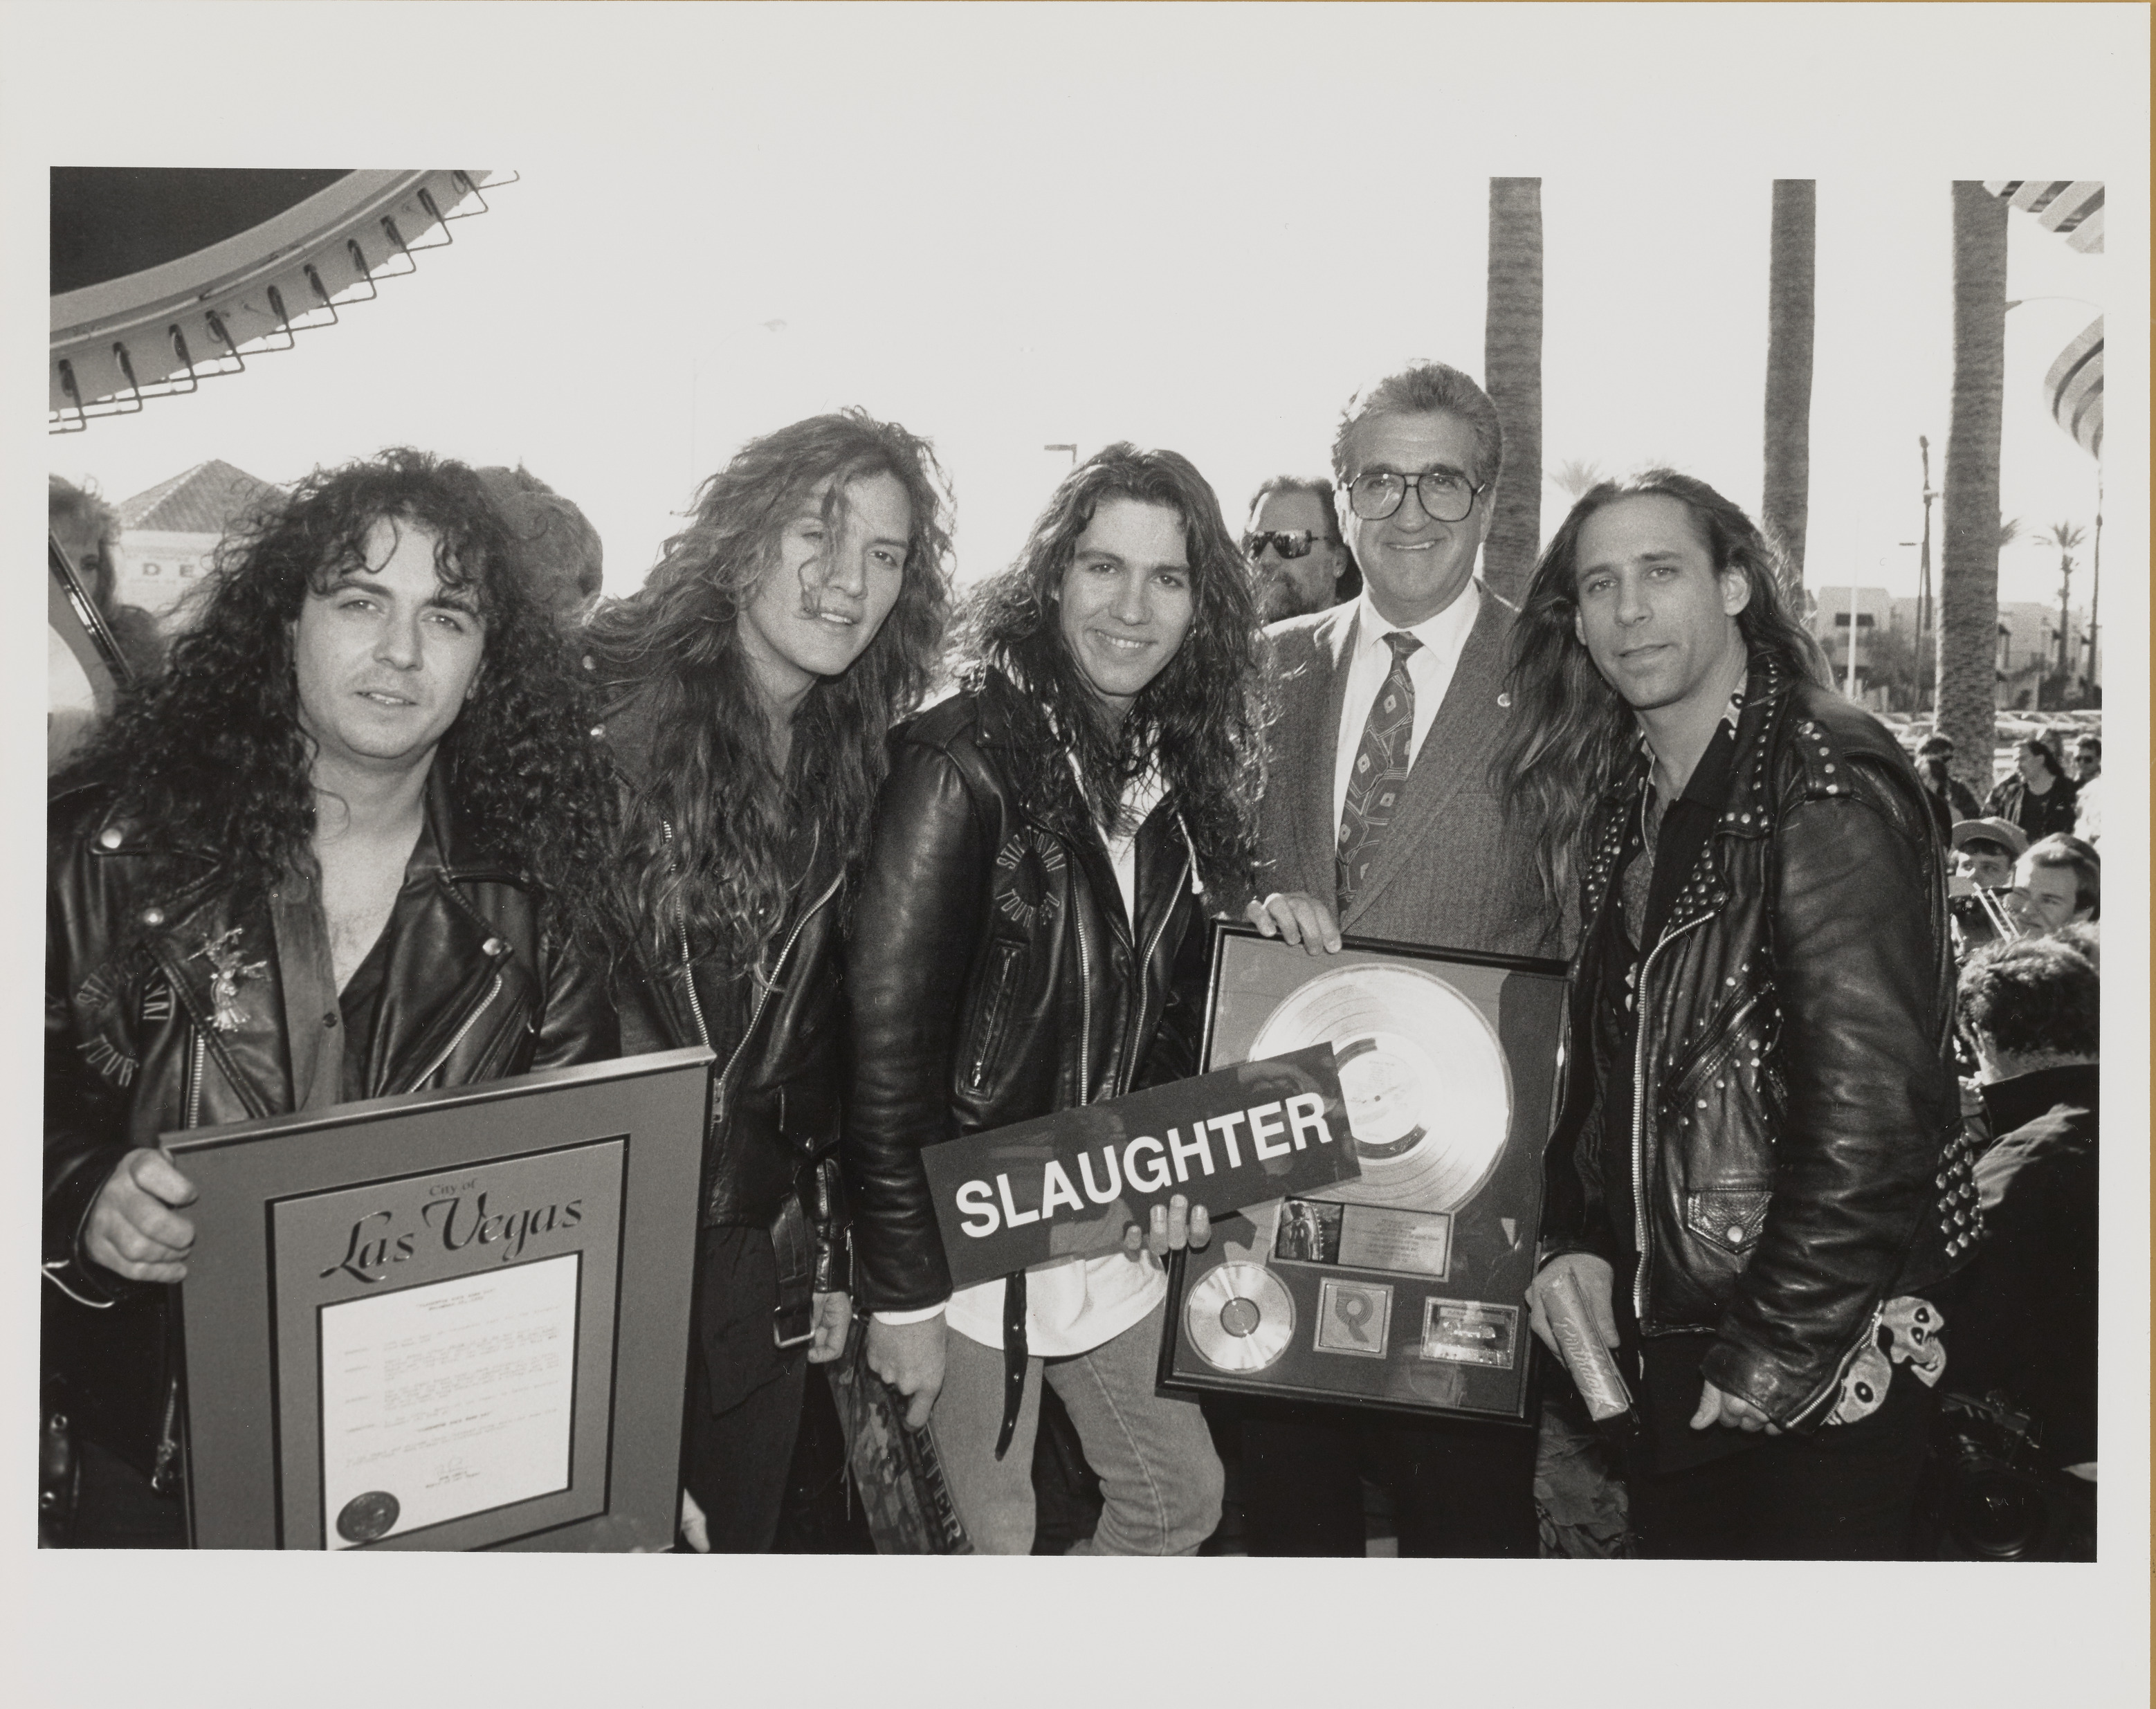 Photograph of Ron Lurie with Slaughter (band)